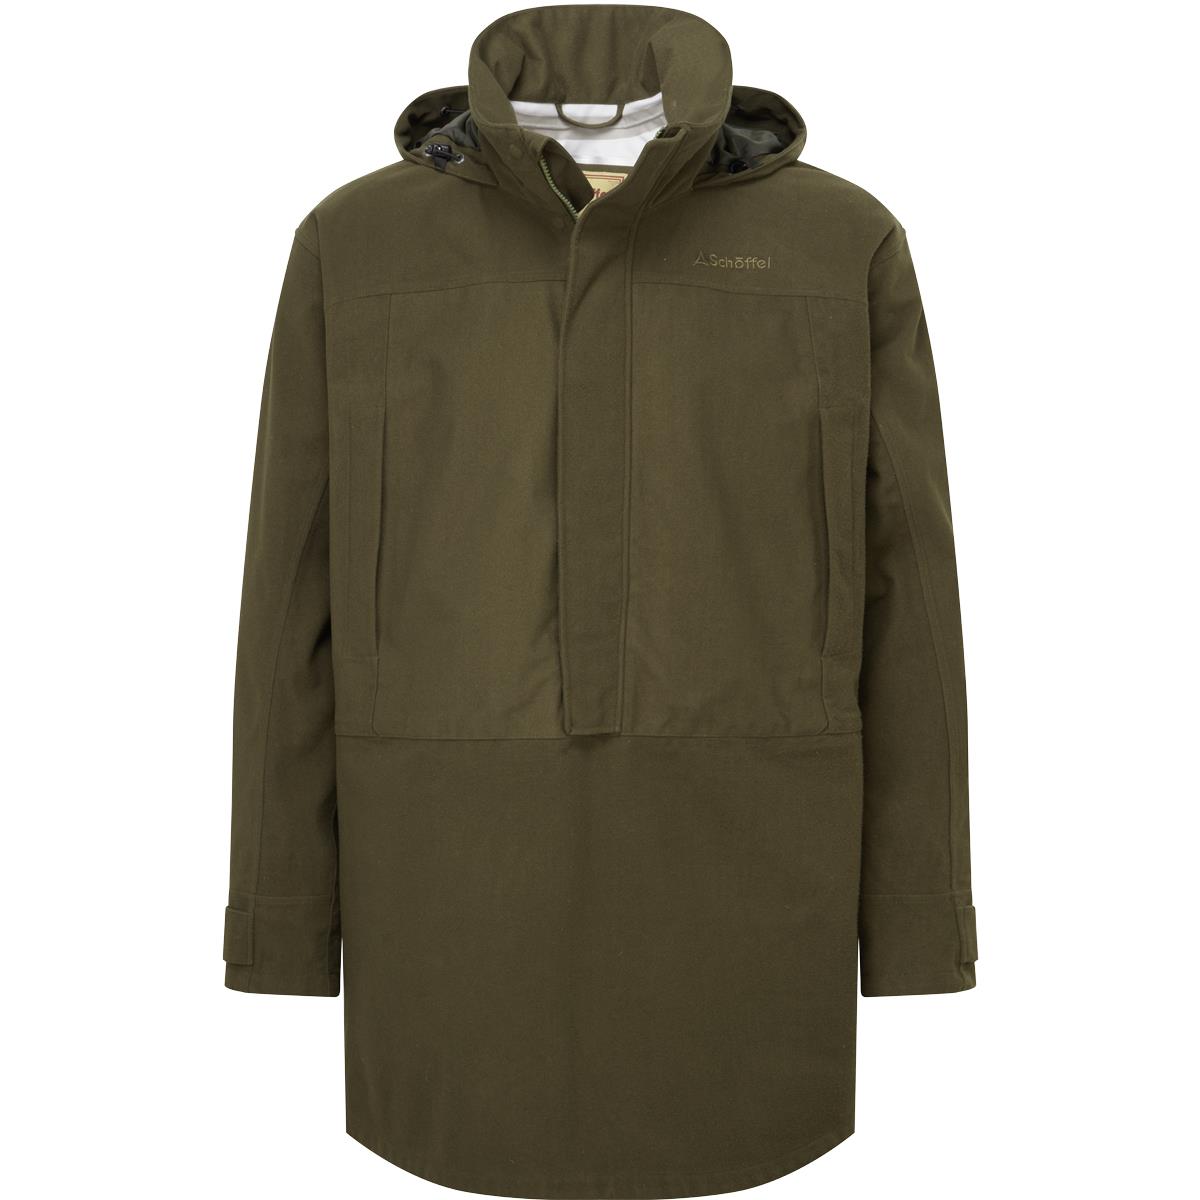 Does the schoffel smock fit generously? I'm a 48 to 50, only 48 is left.